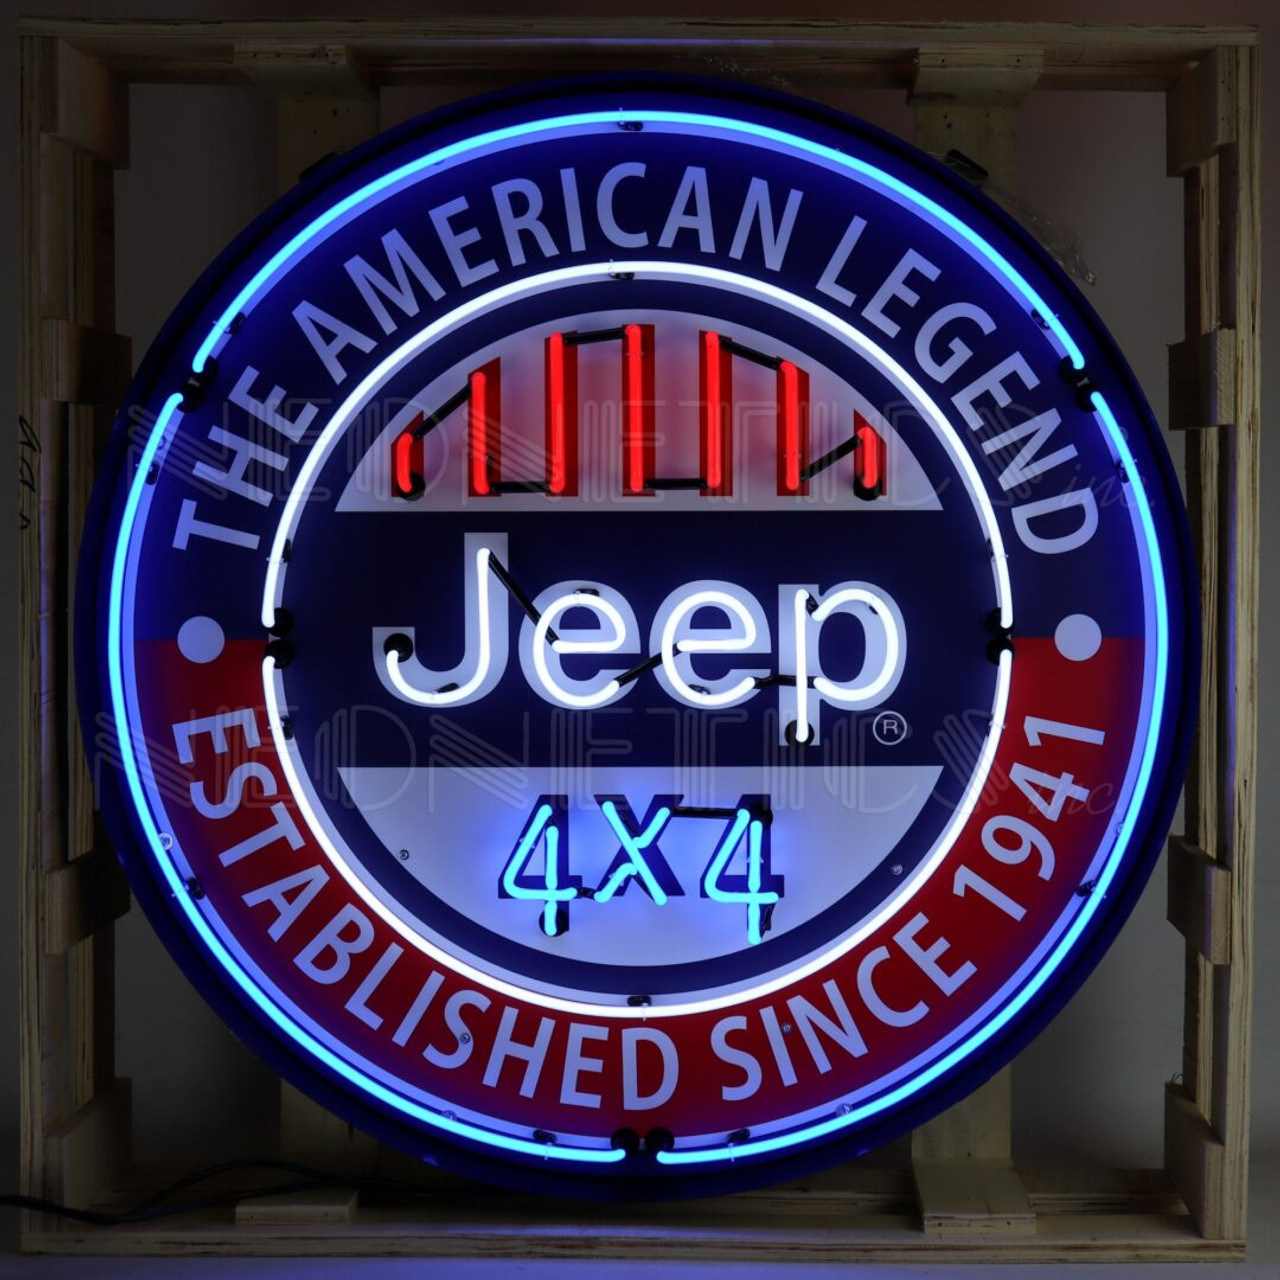 AUTHORIZED FORD SERVICE 36 INCH NEON SIGN IN METAL CAN